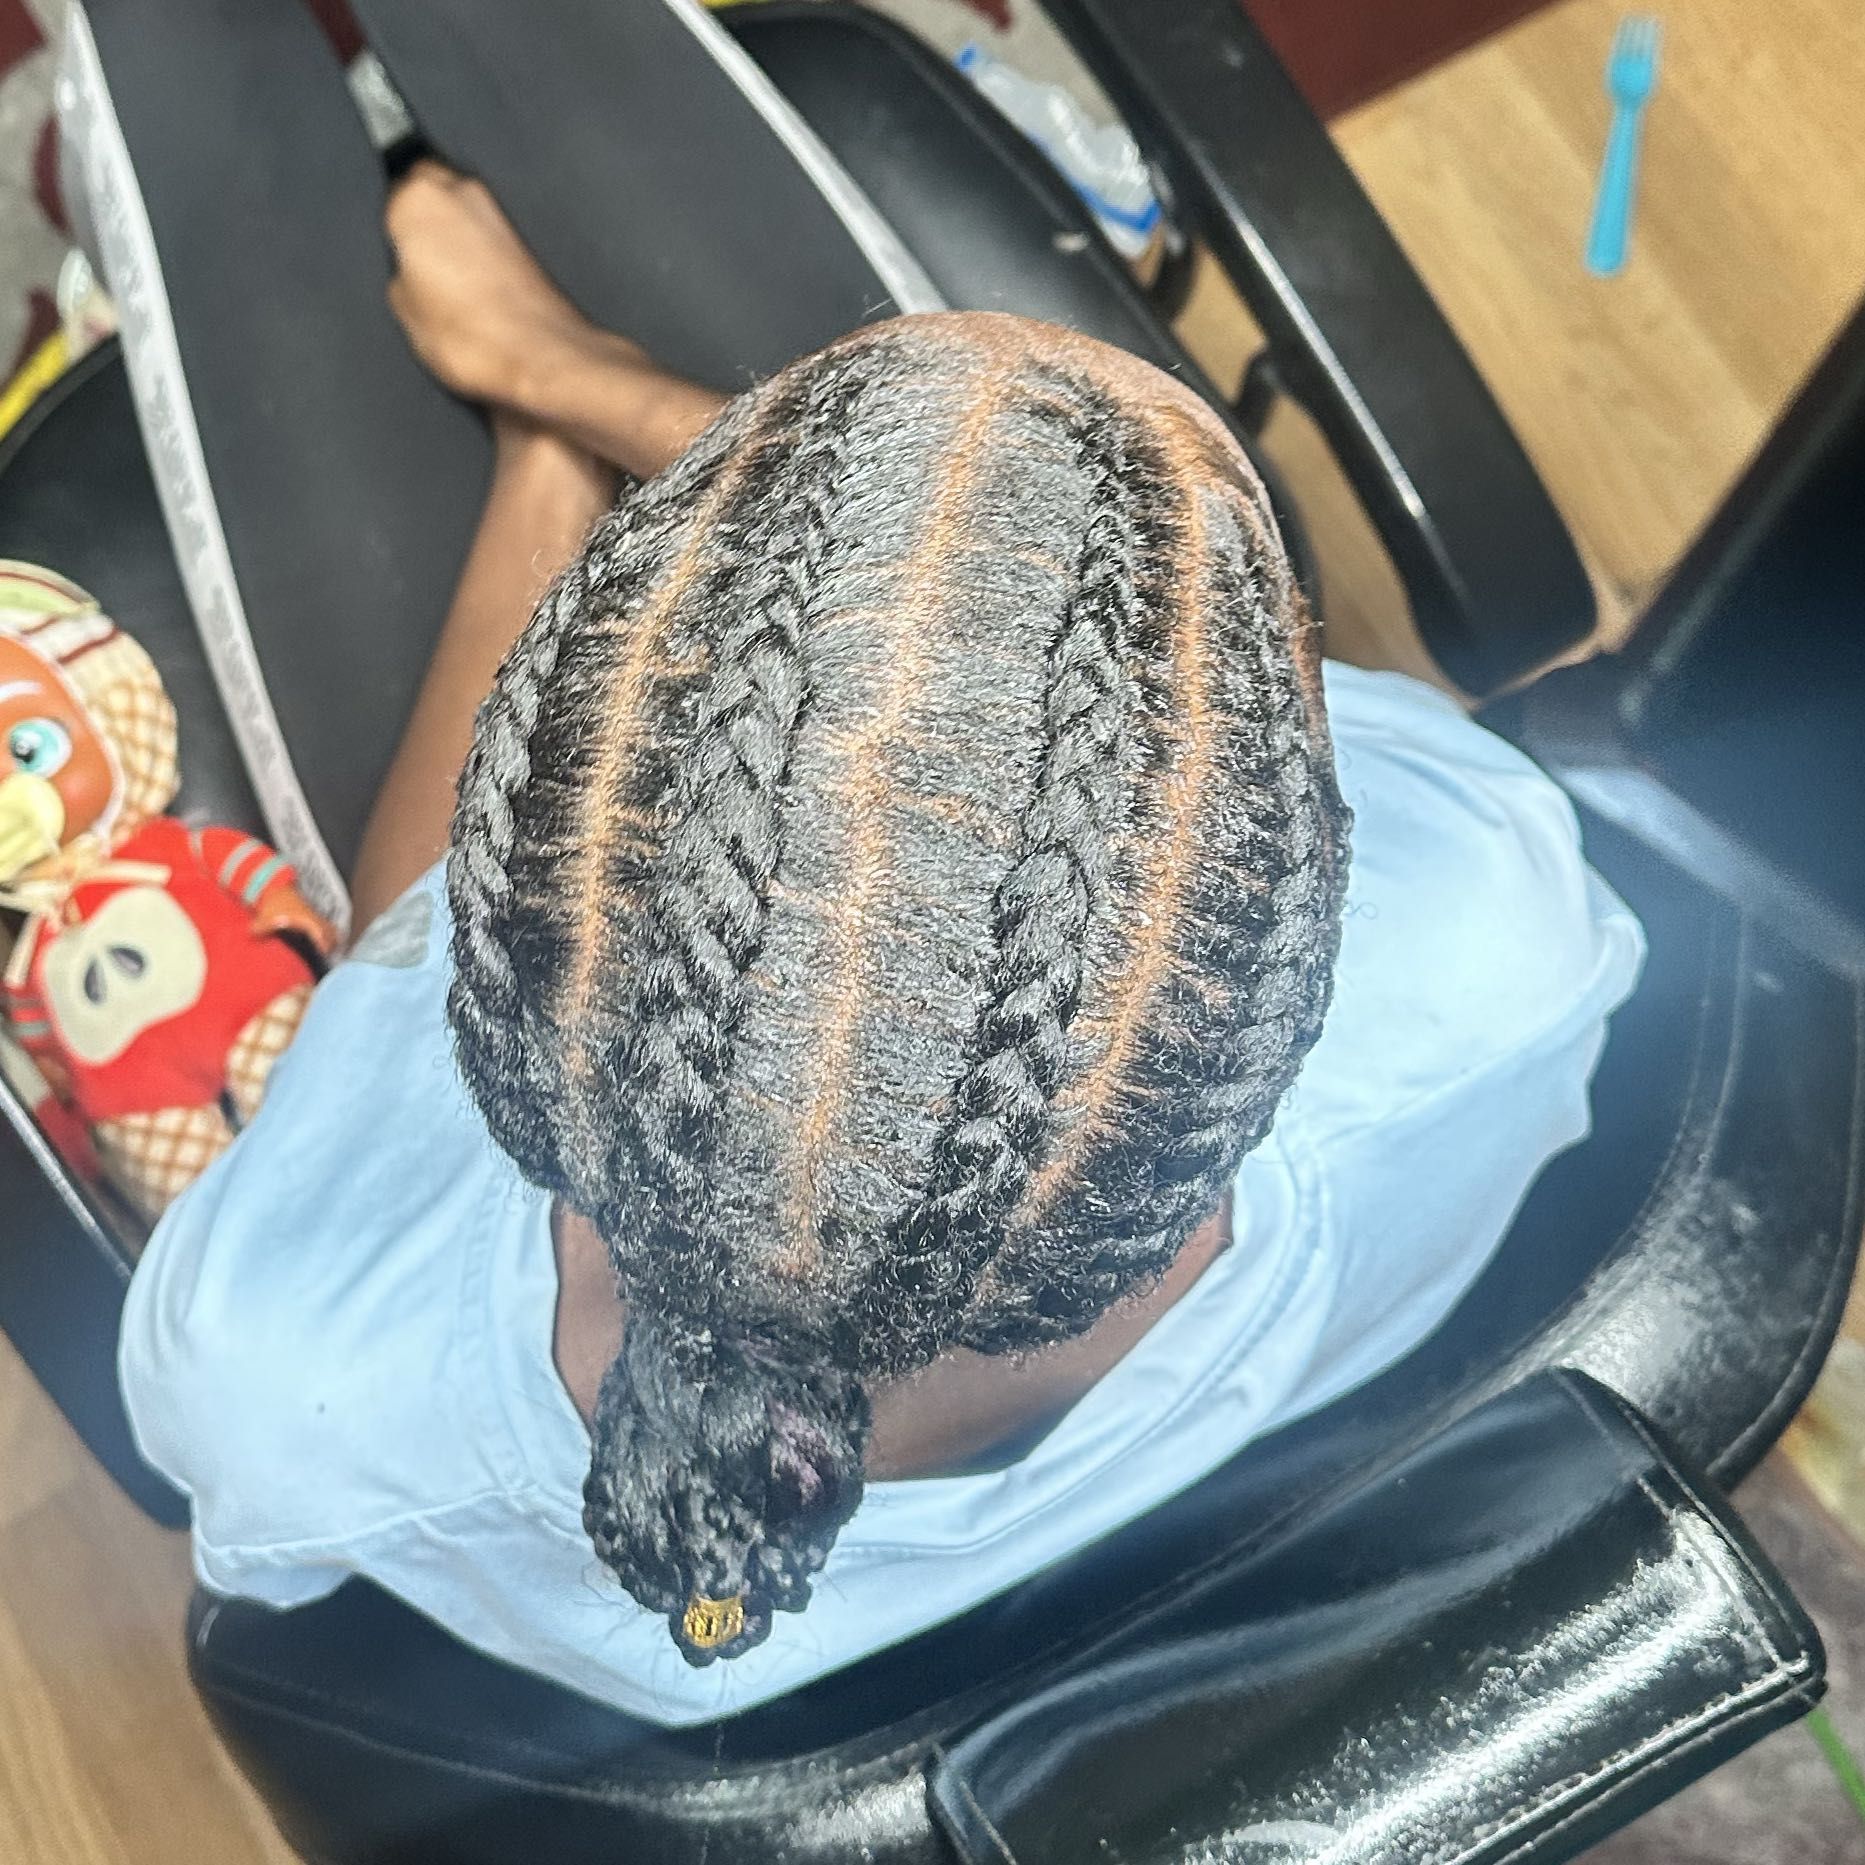 Any Kids Braided Styles Hair Included portfolio